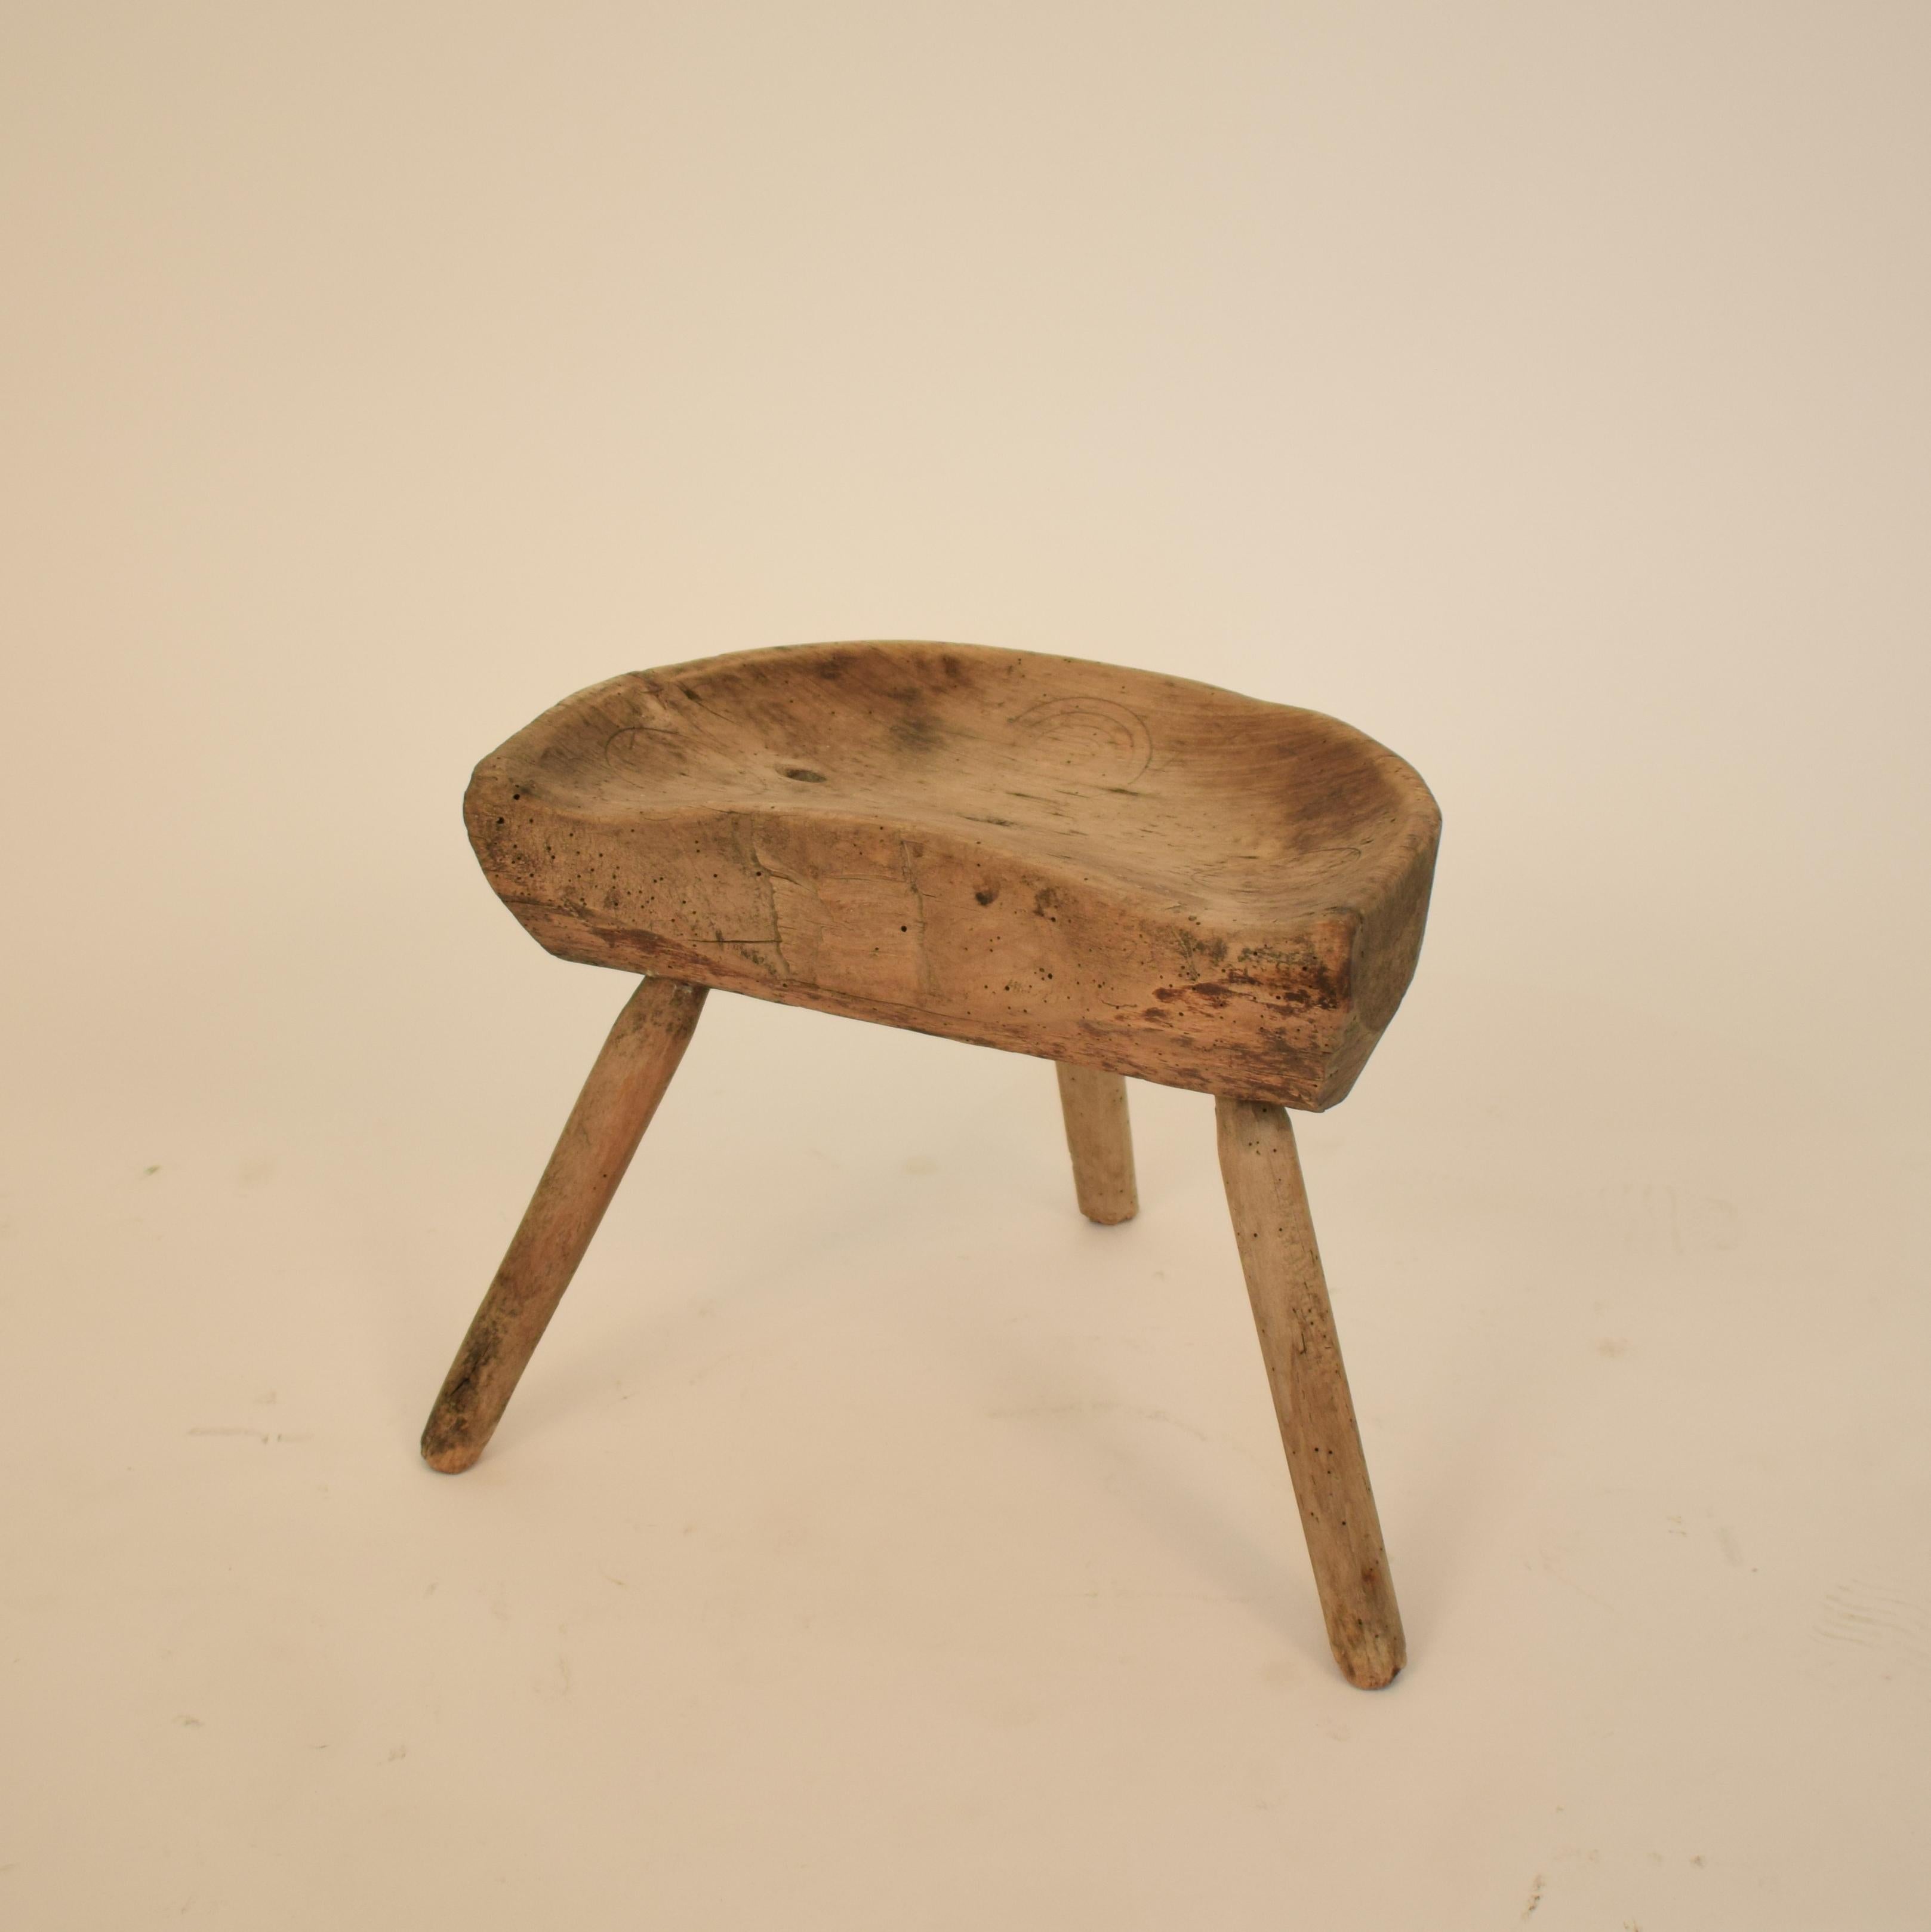 This primitive cobbler splayed leg wood stool was made in the early 19th century, circa 1820.
The stool has a beautiful Patina and is in its original condition.